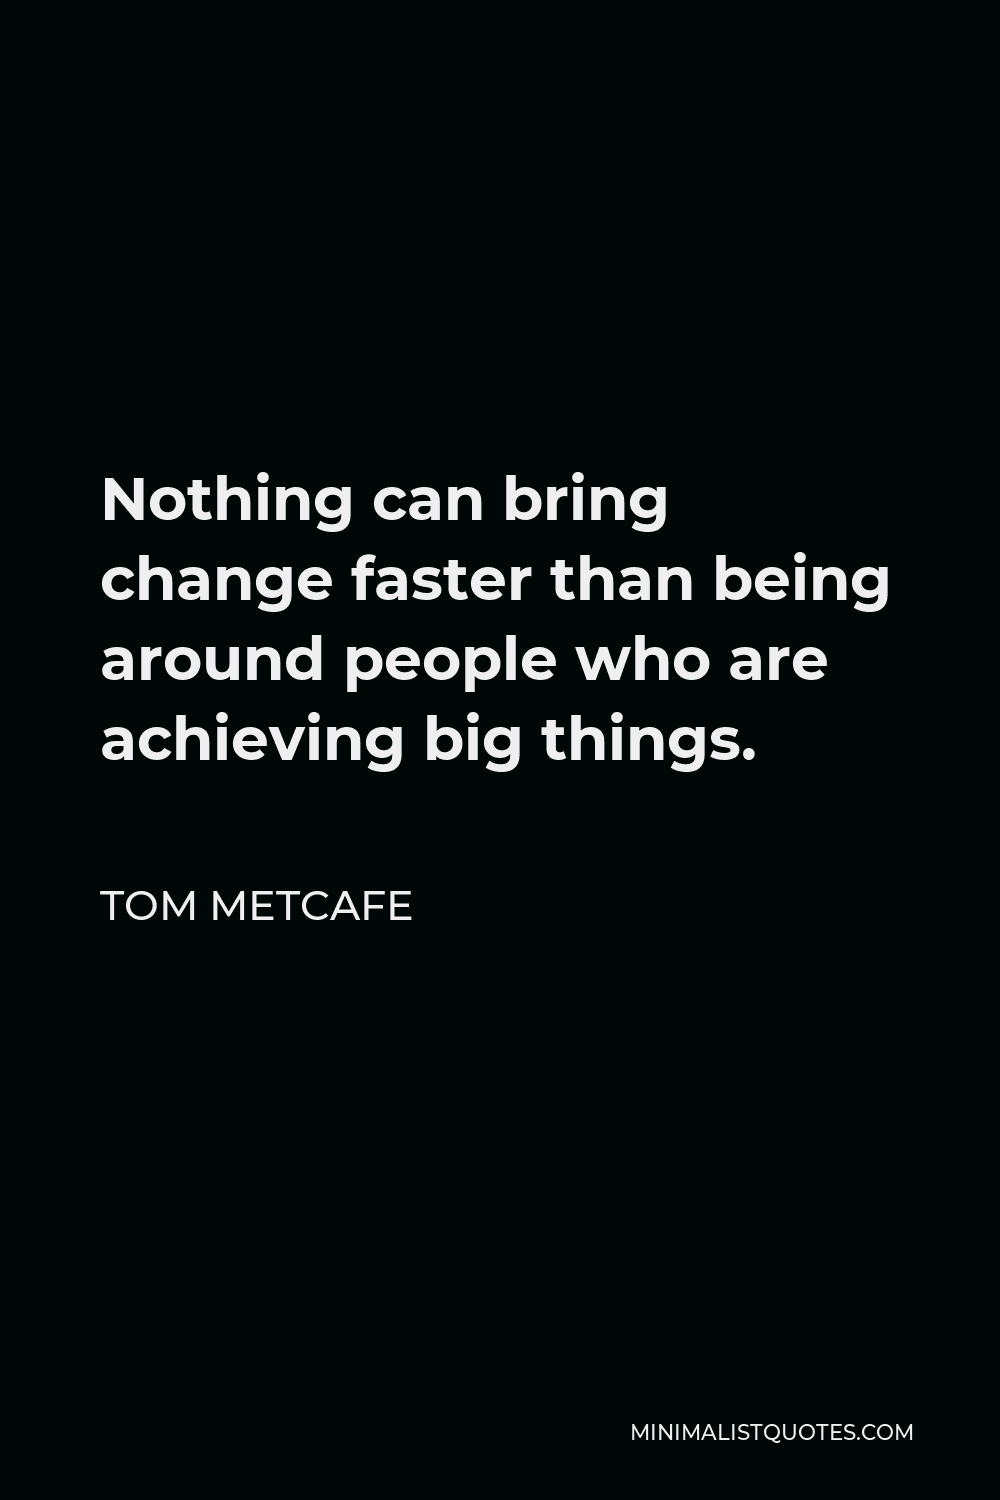 Tom Metcafe Quote - Nothing can bring change faster than being around people who are achieving big things.